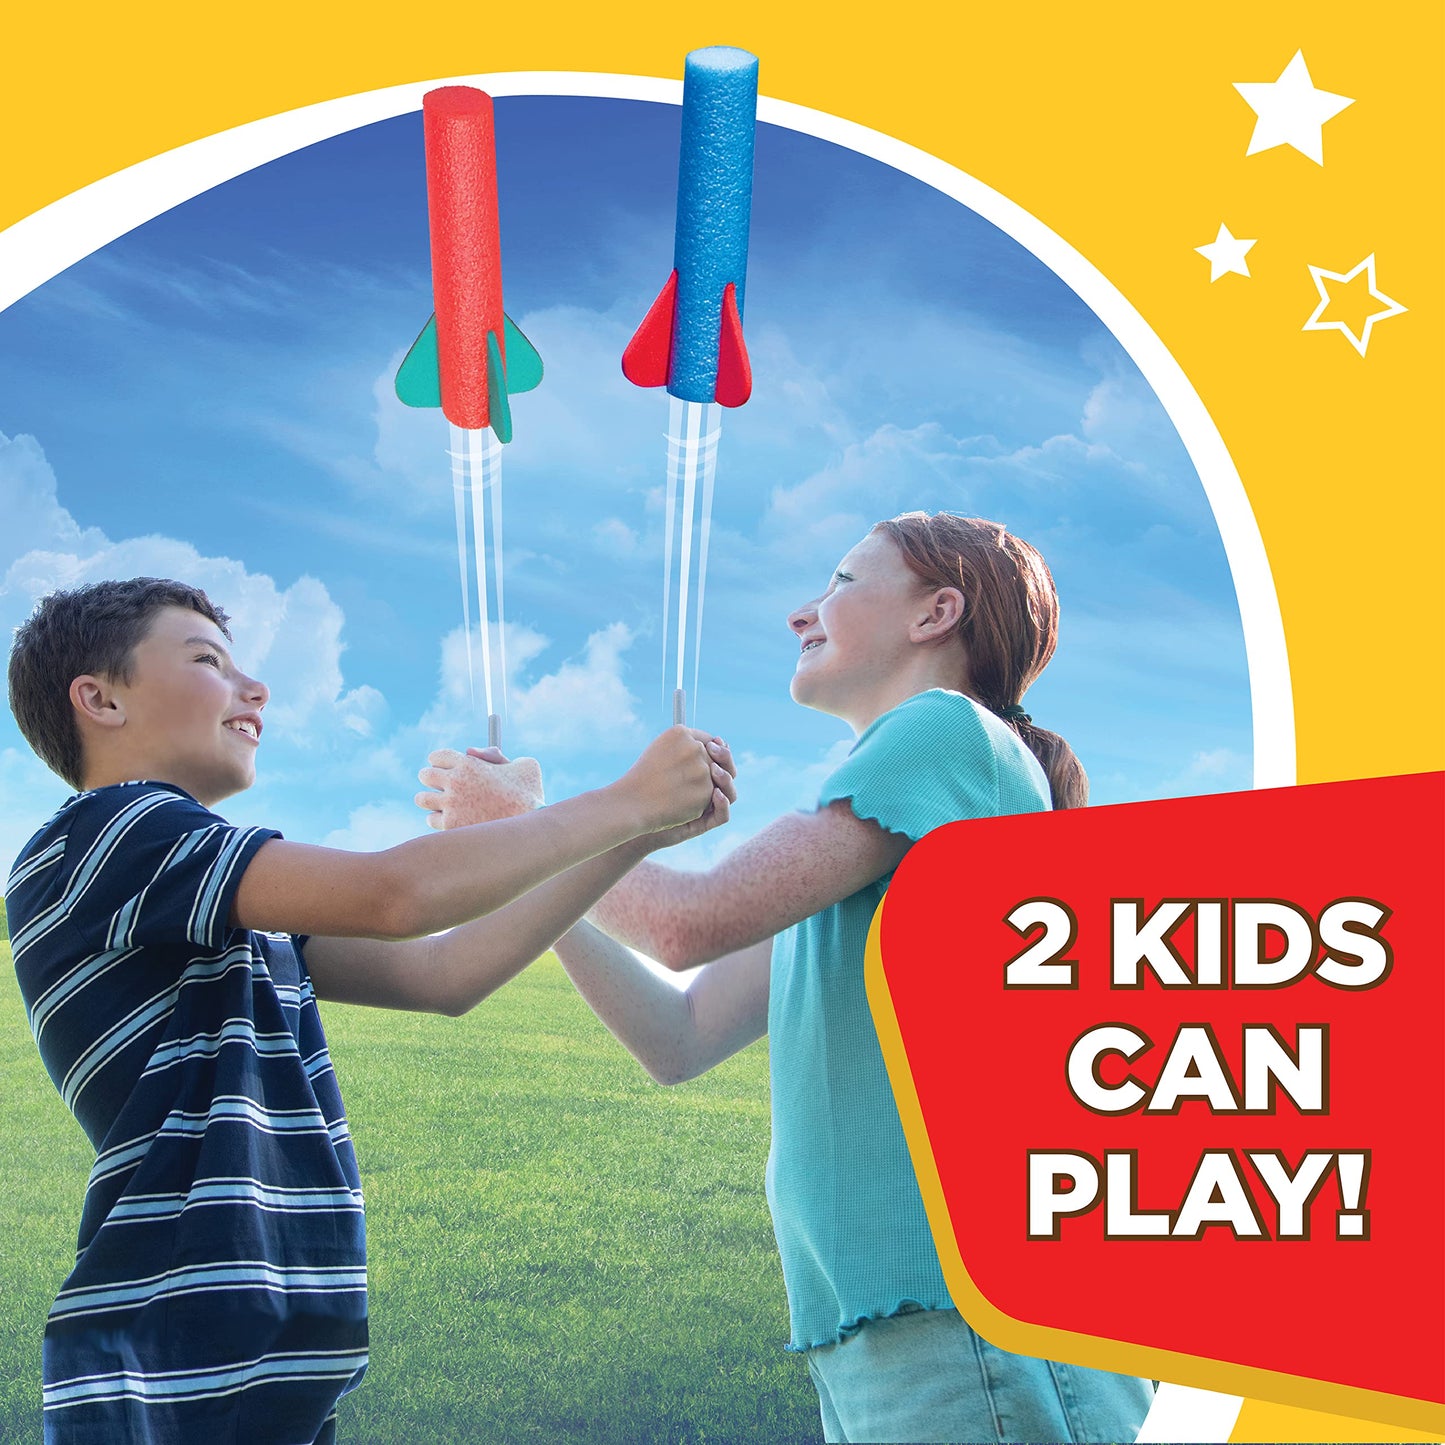 Stomp Rocket The Original Squeeze Rocket, 10 Rockets - Soft Foam Rocket Launcher STEM Gift for Boys &amp; Girls - Ages 4 &amp; Up - Fun Backyard &amp; Outdoor Kids Toys Gifts for Boys &amp; Girls